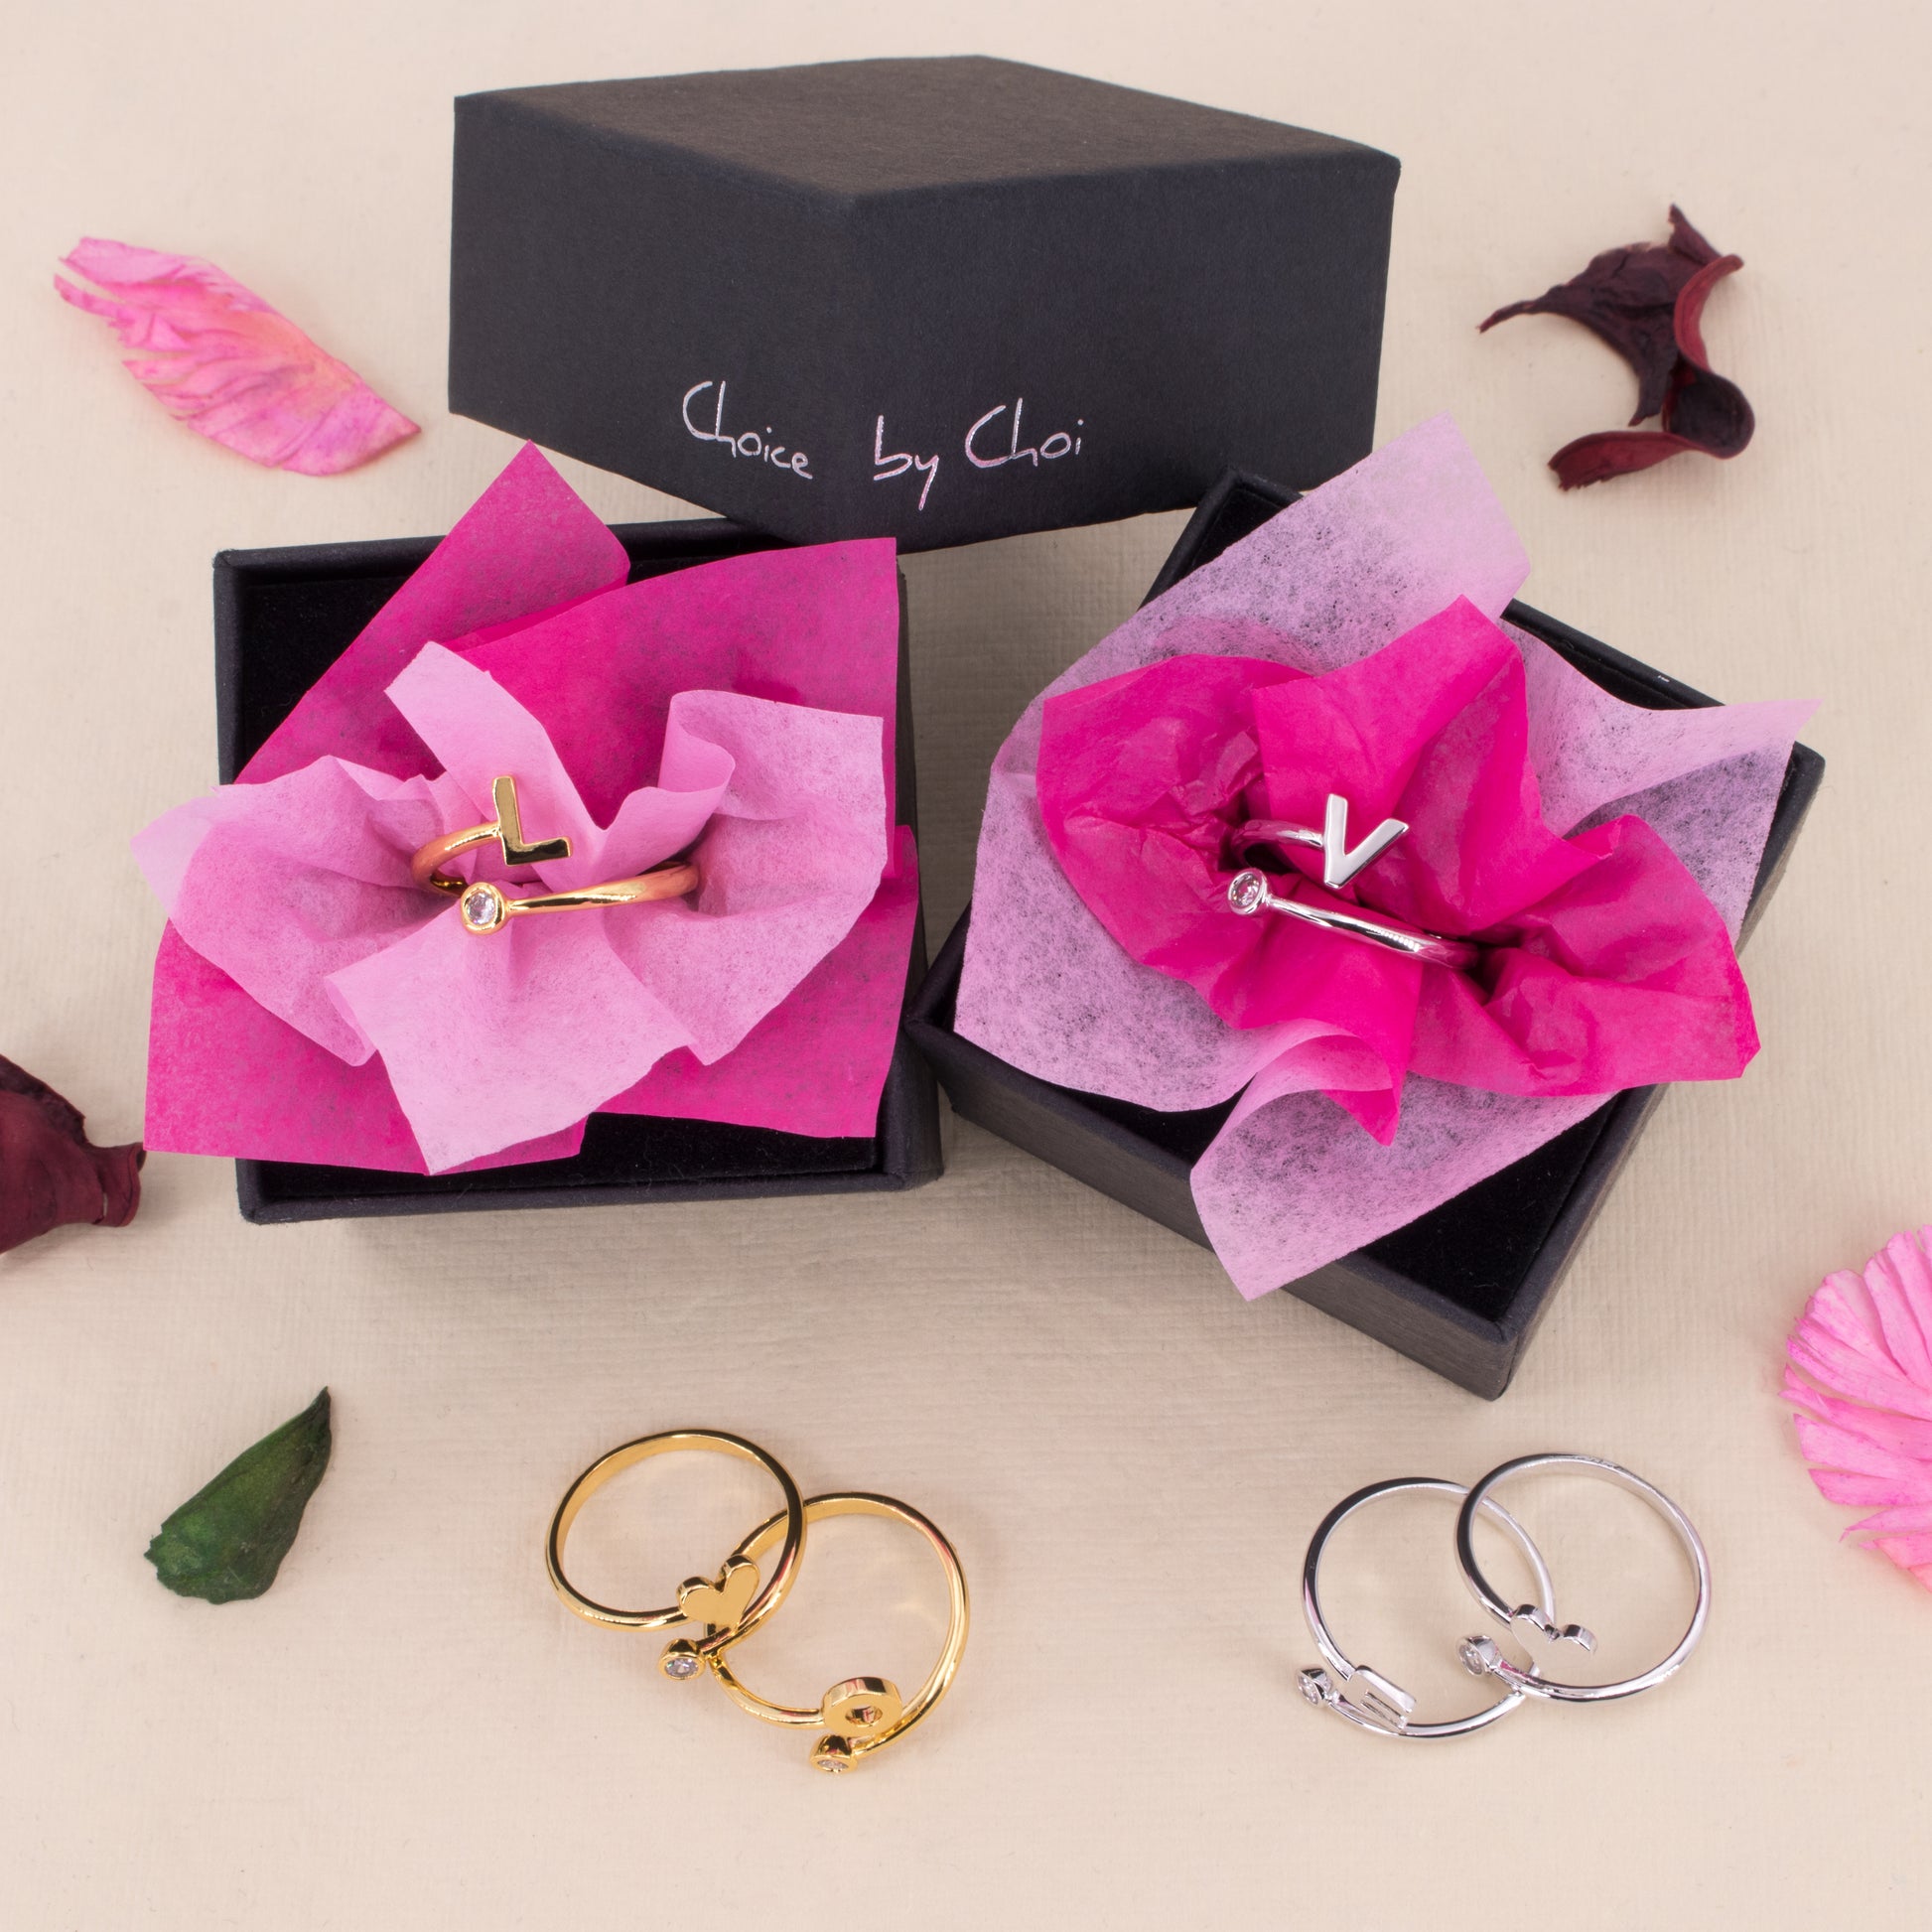 zirconia monogram cuff rings with boxes and flower petals